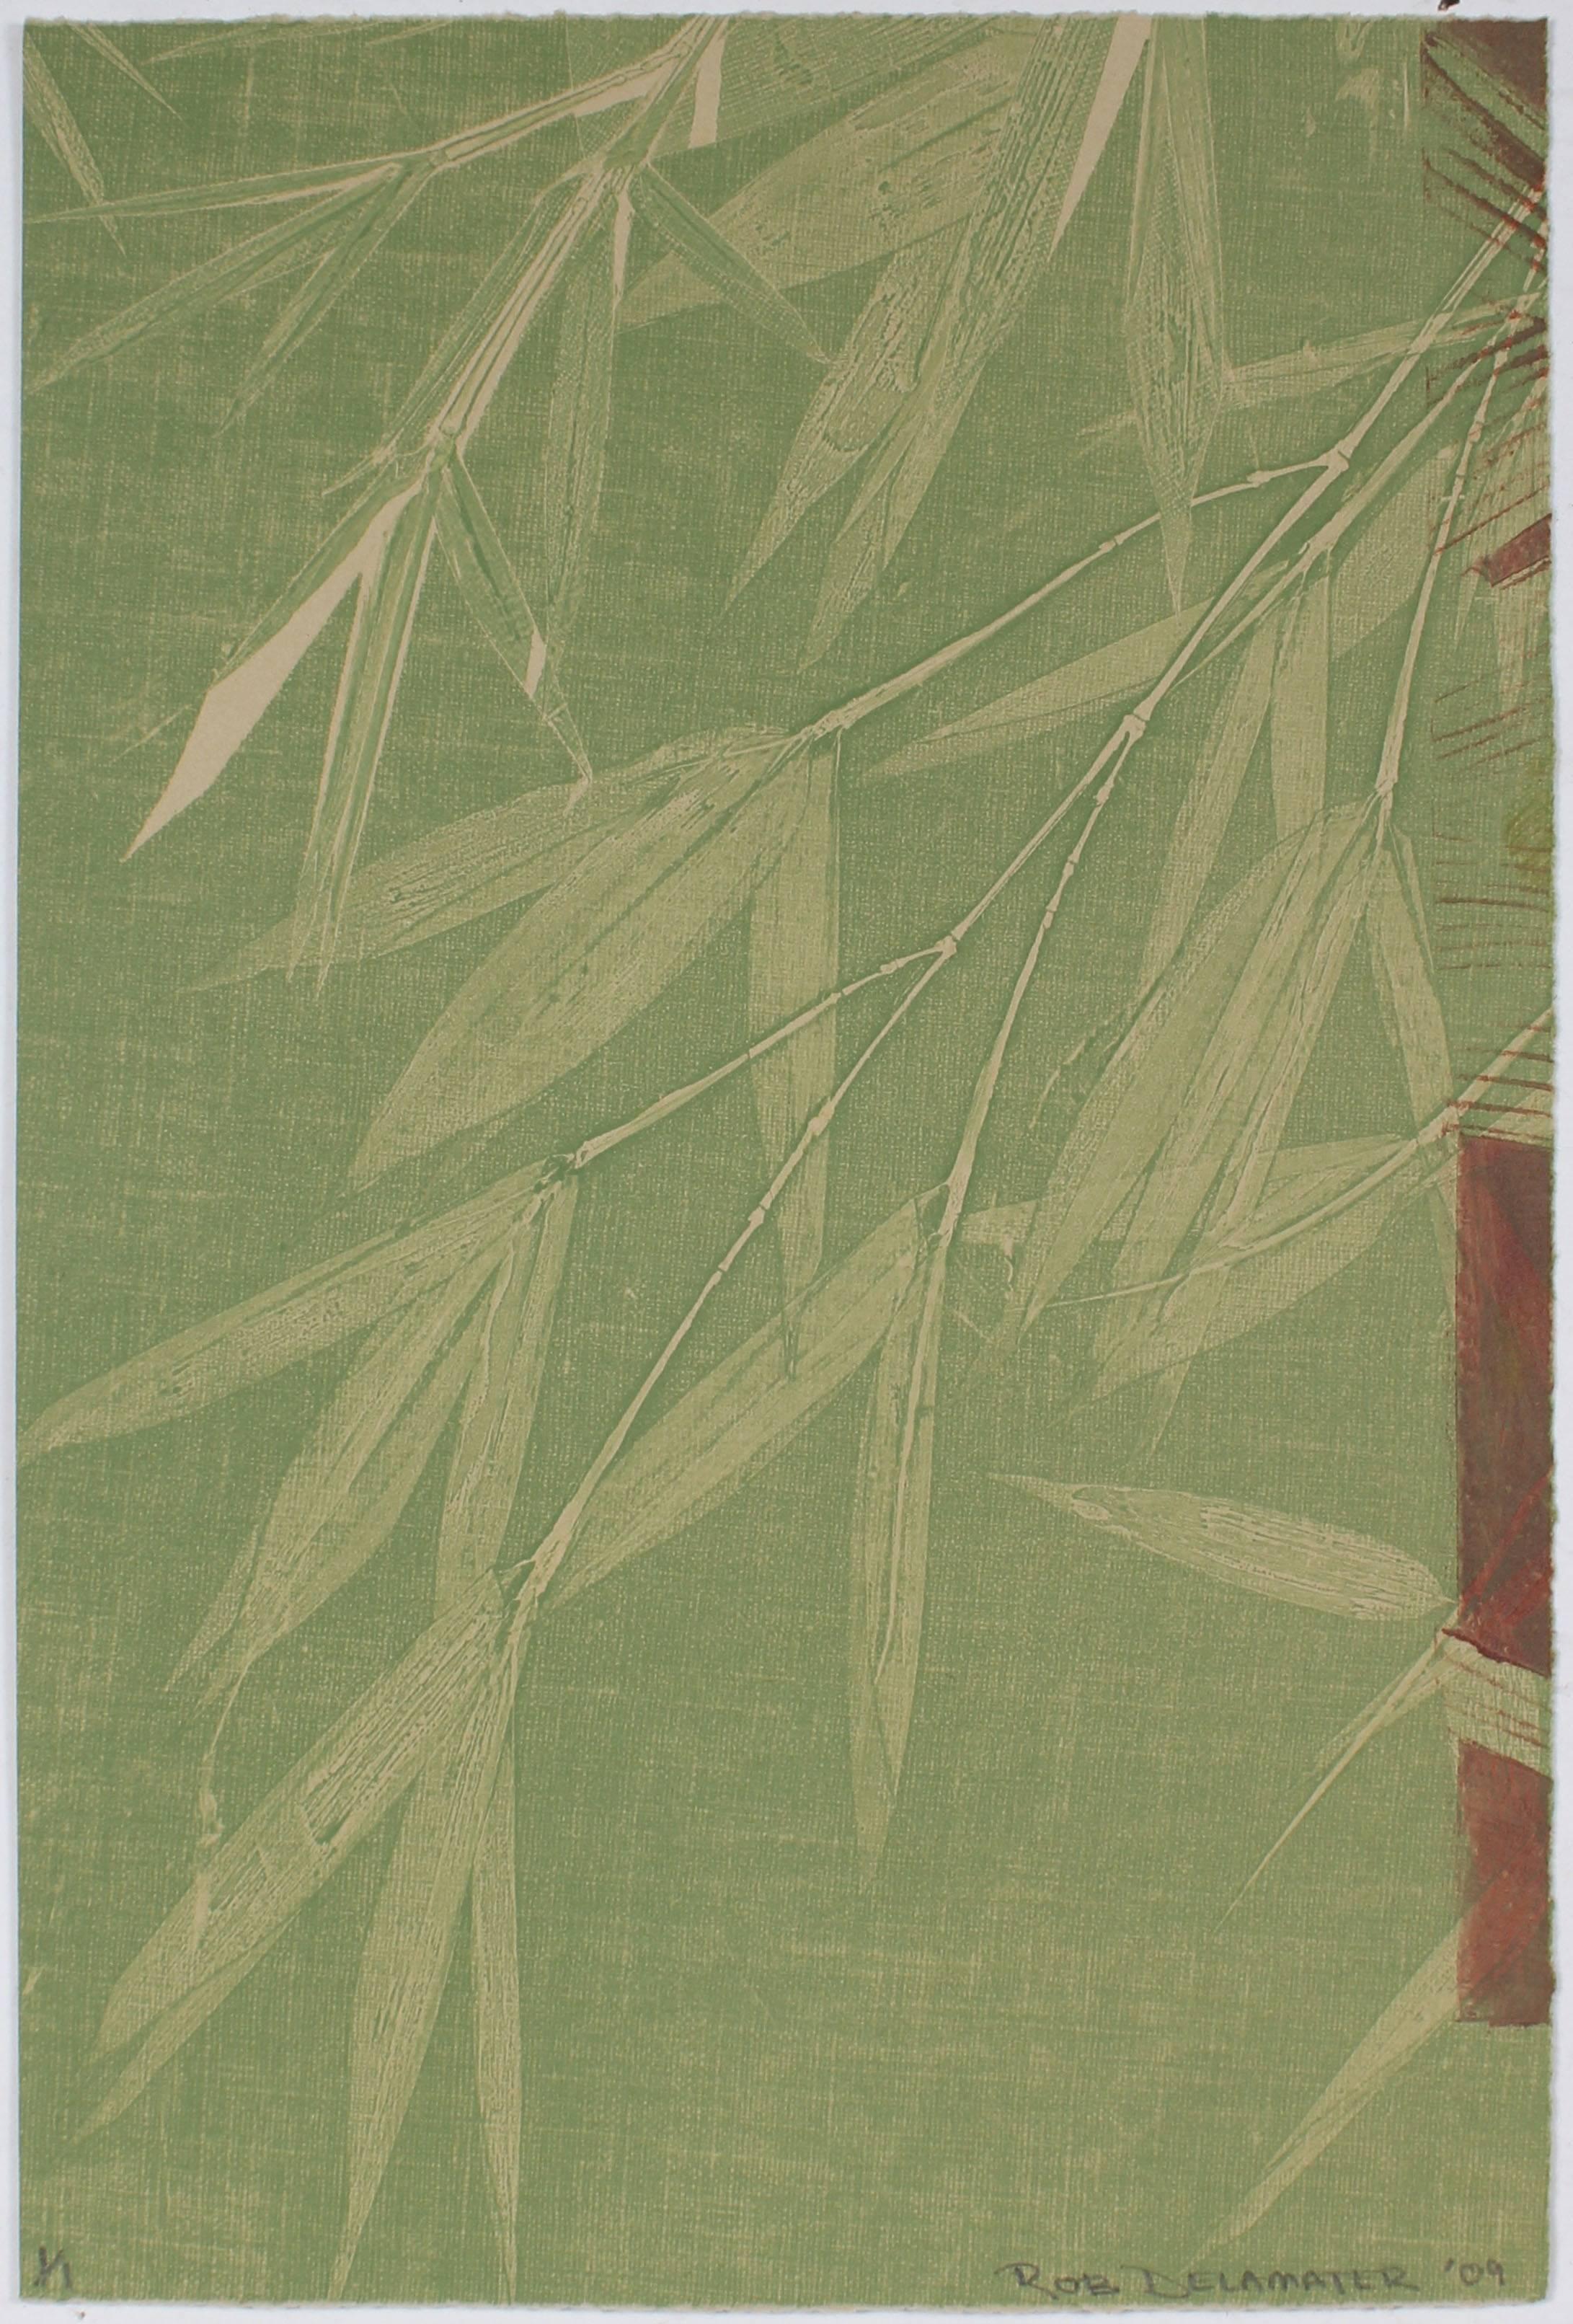 Rob Delamater Still-Life Print - Contemporary Minimalist Bamboo Monotype in Green, Asian Aesthetic, 2009